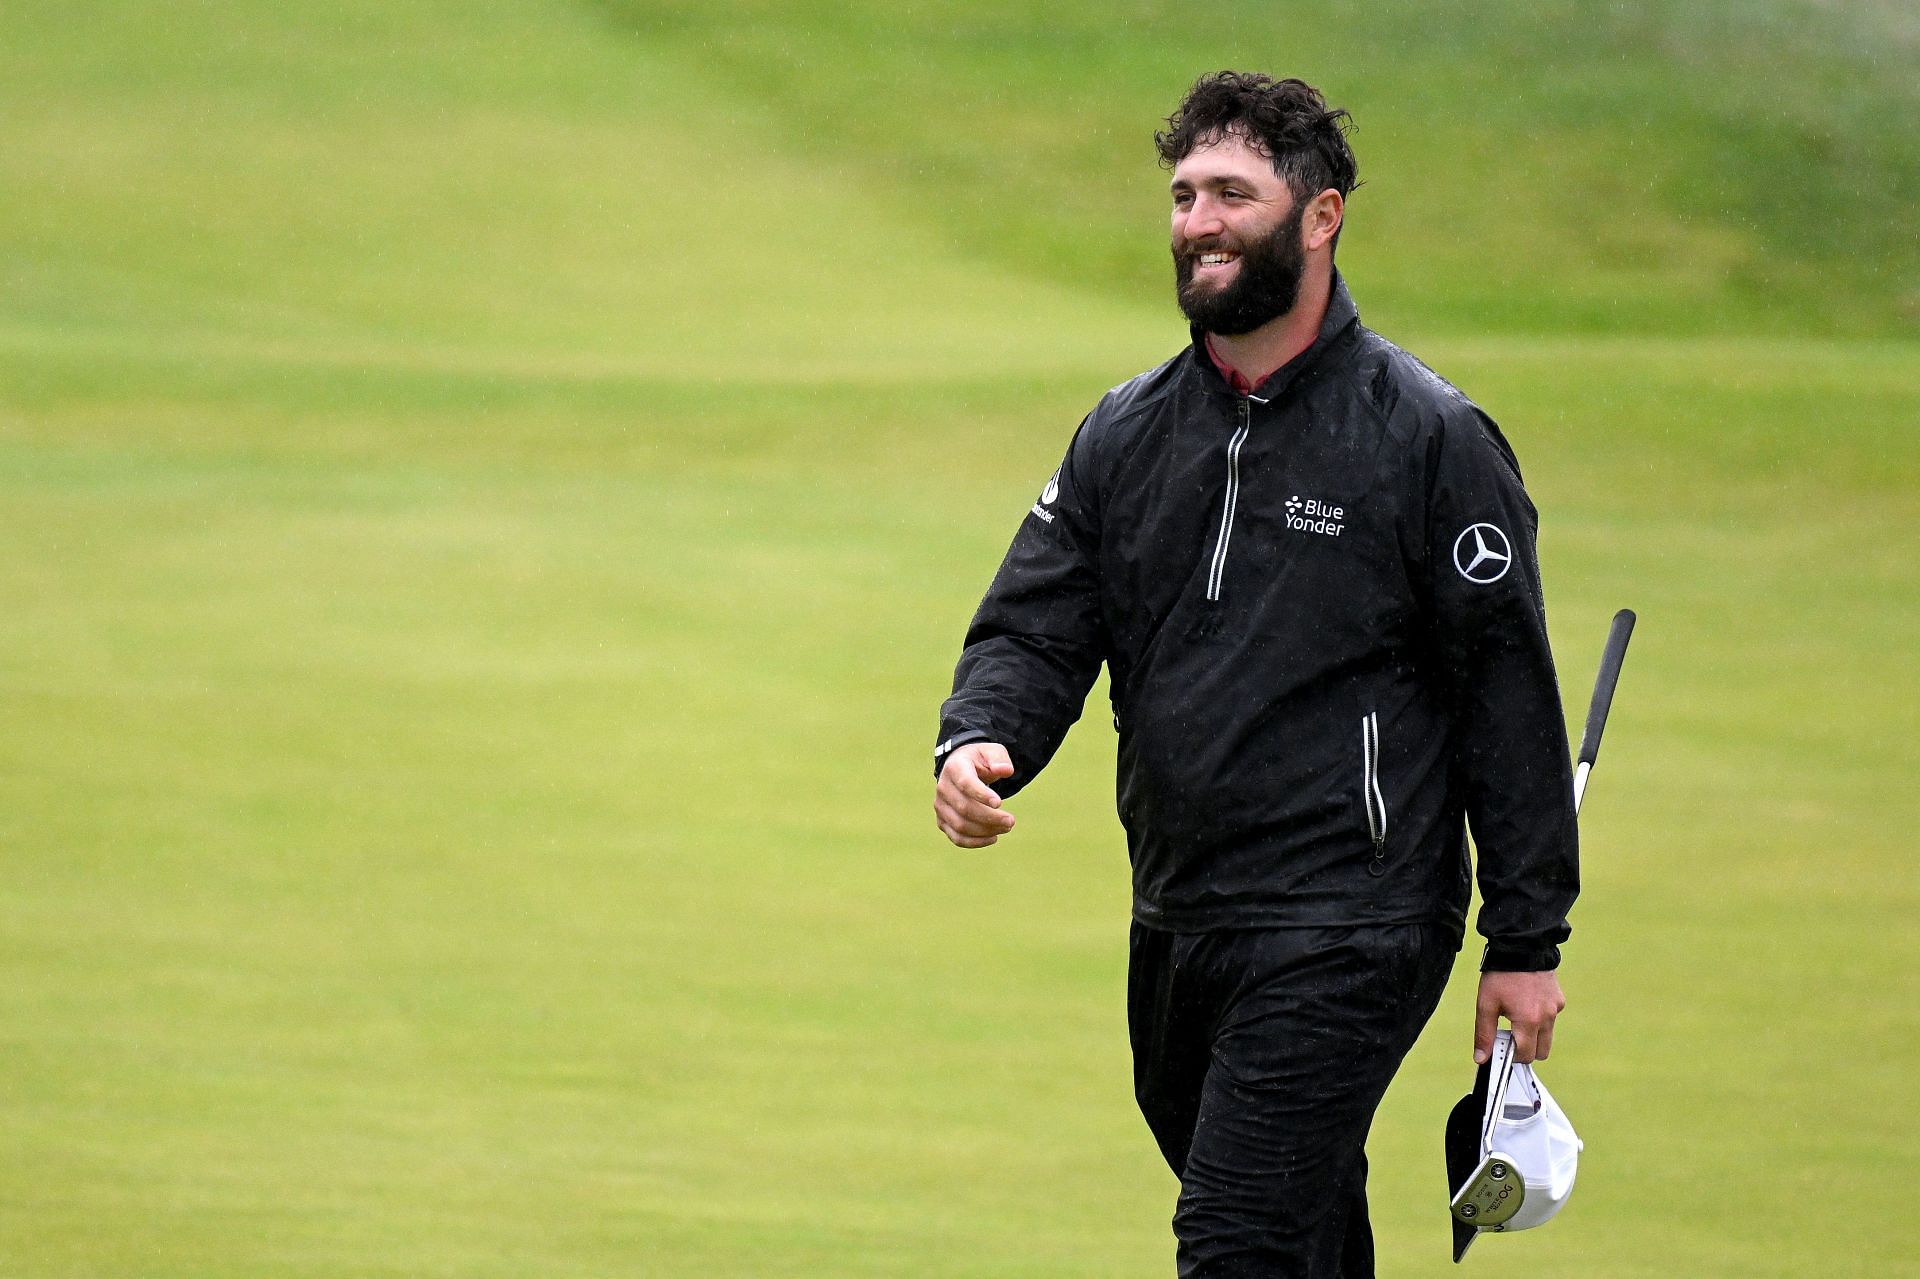 Jon Rahm during the fourth day of the 2023 Open Championship